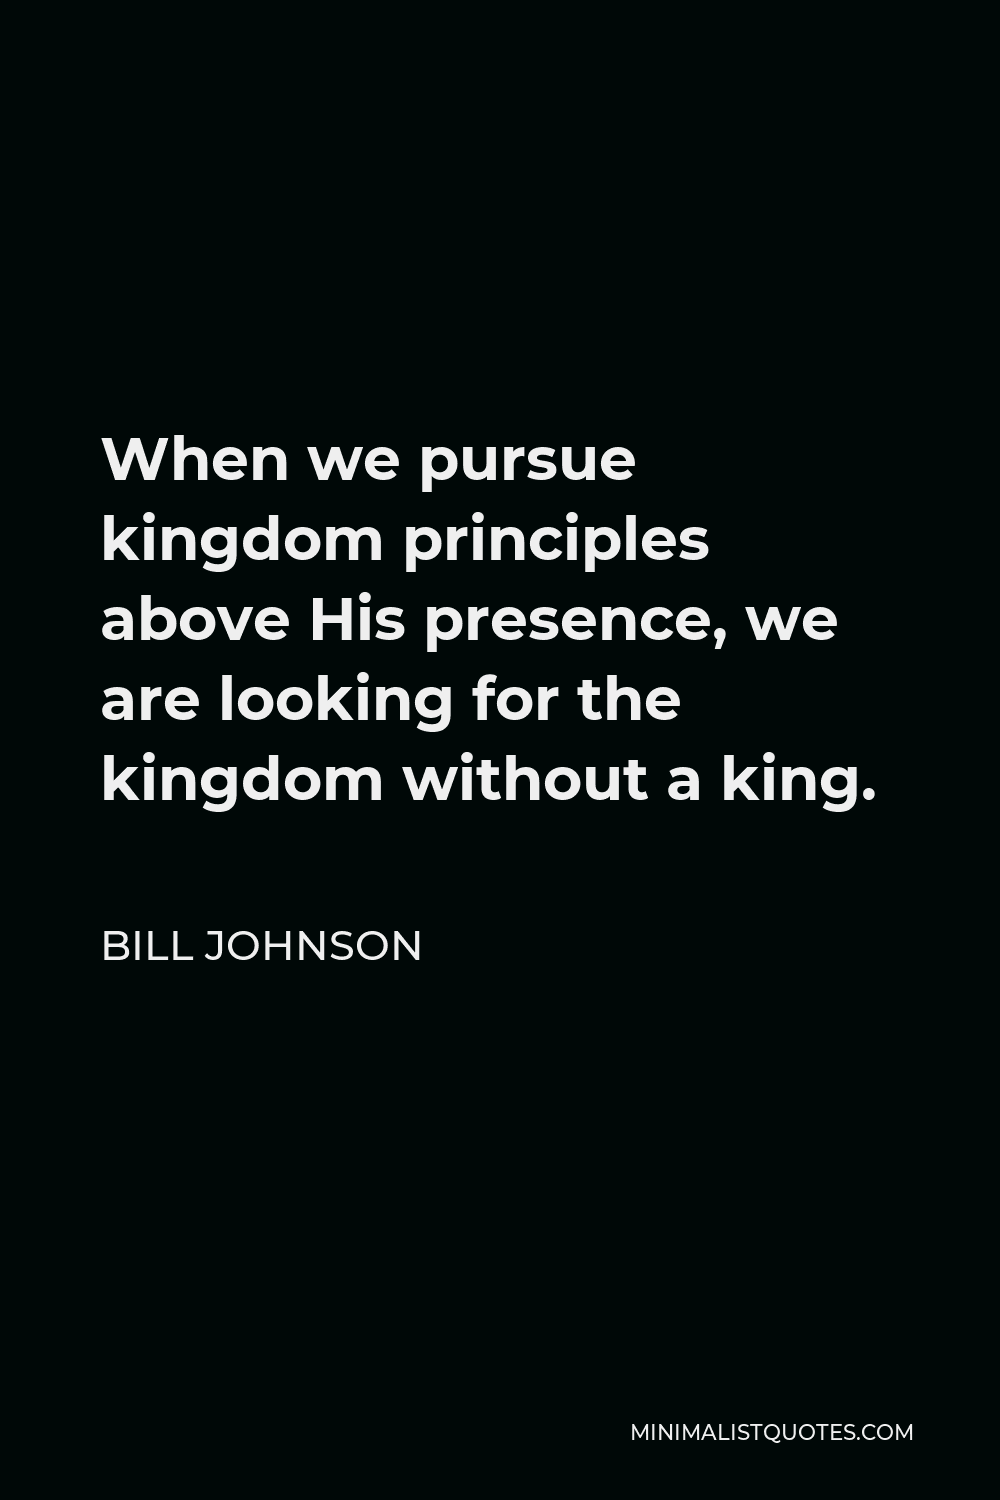 Bill Johnson Quote - When we pursue kingdom principles above His presence, we are looking for the kingdom without a king.